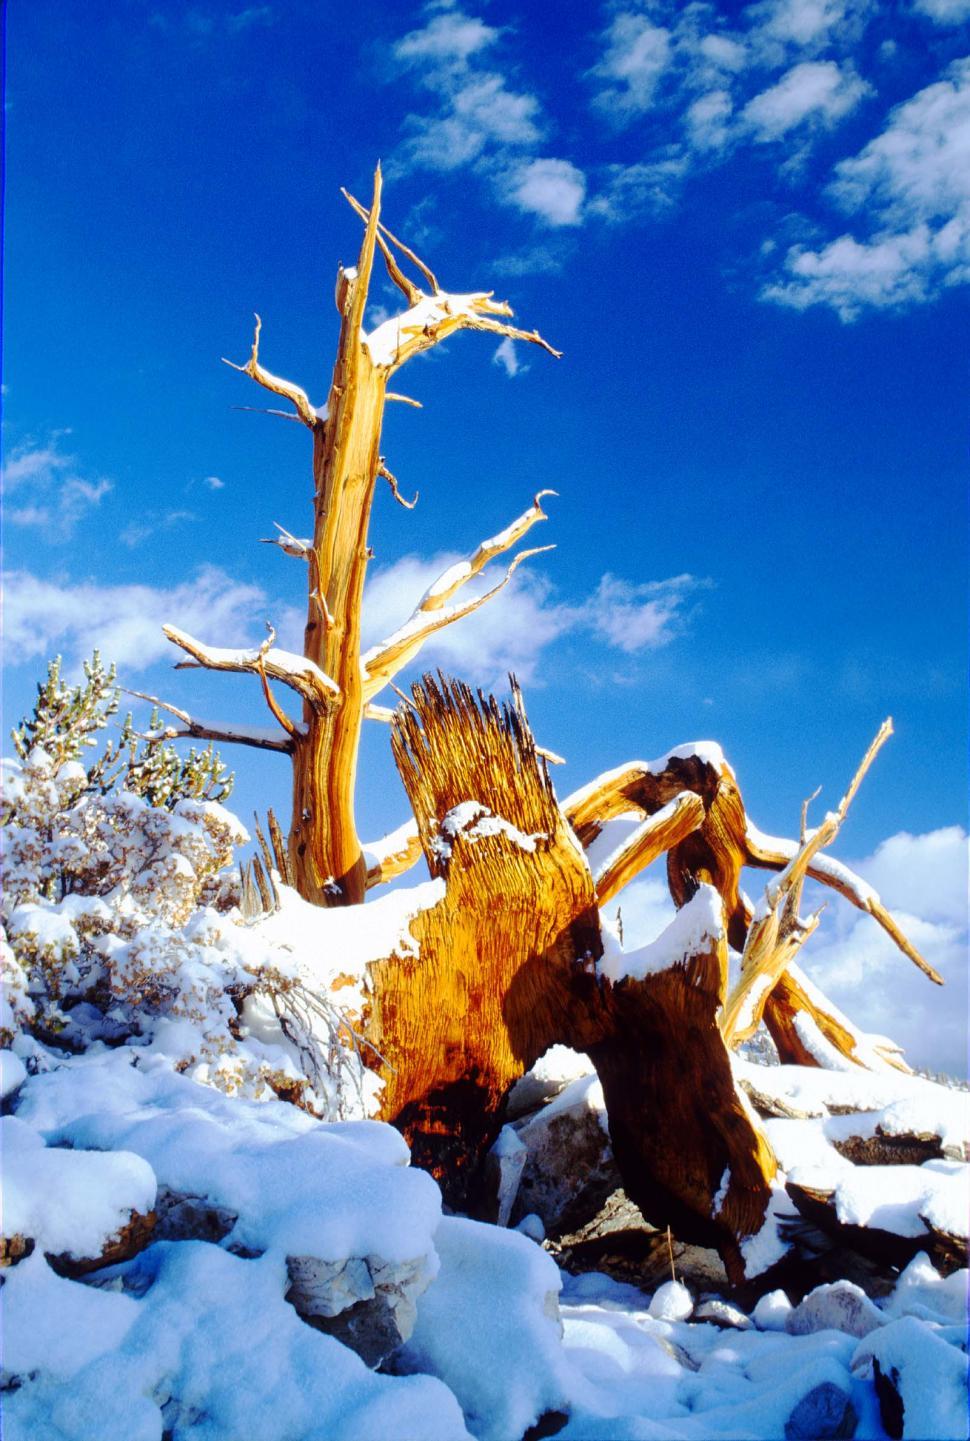 Free Image of snow covered trees dead stumps blue sky cold winter 